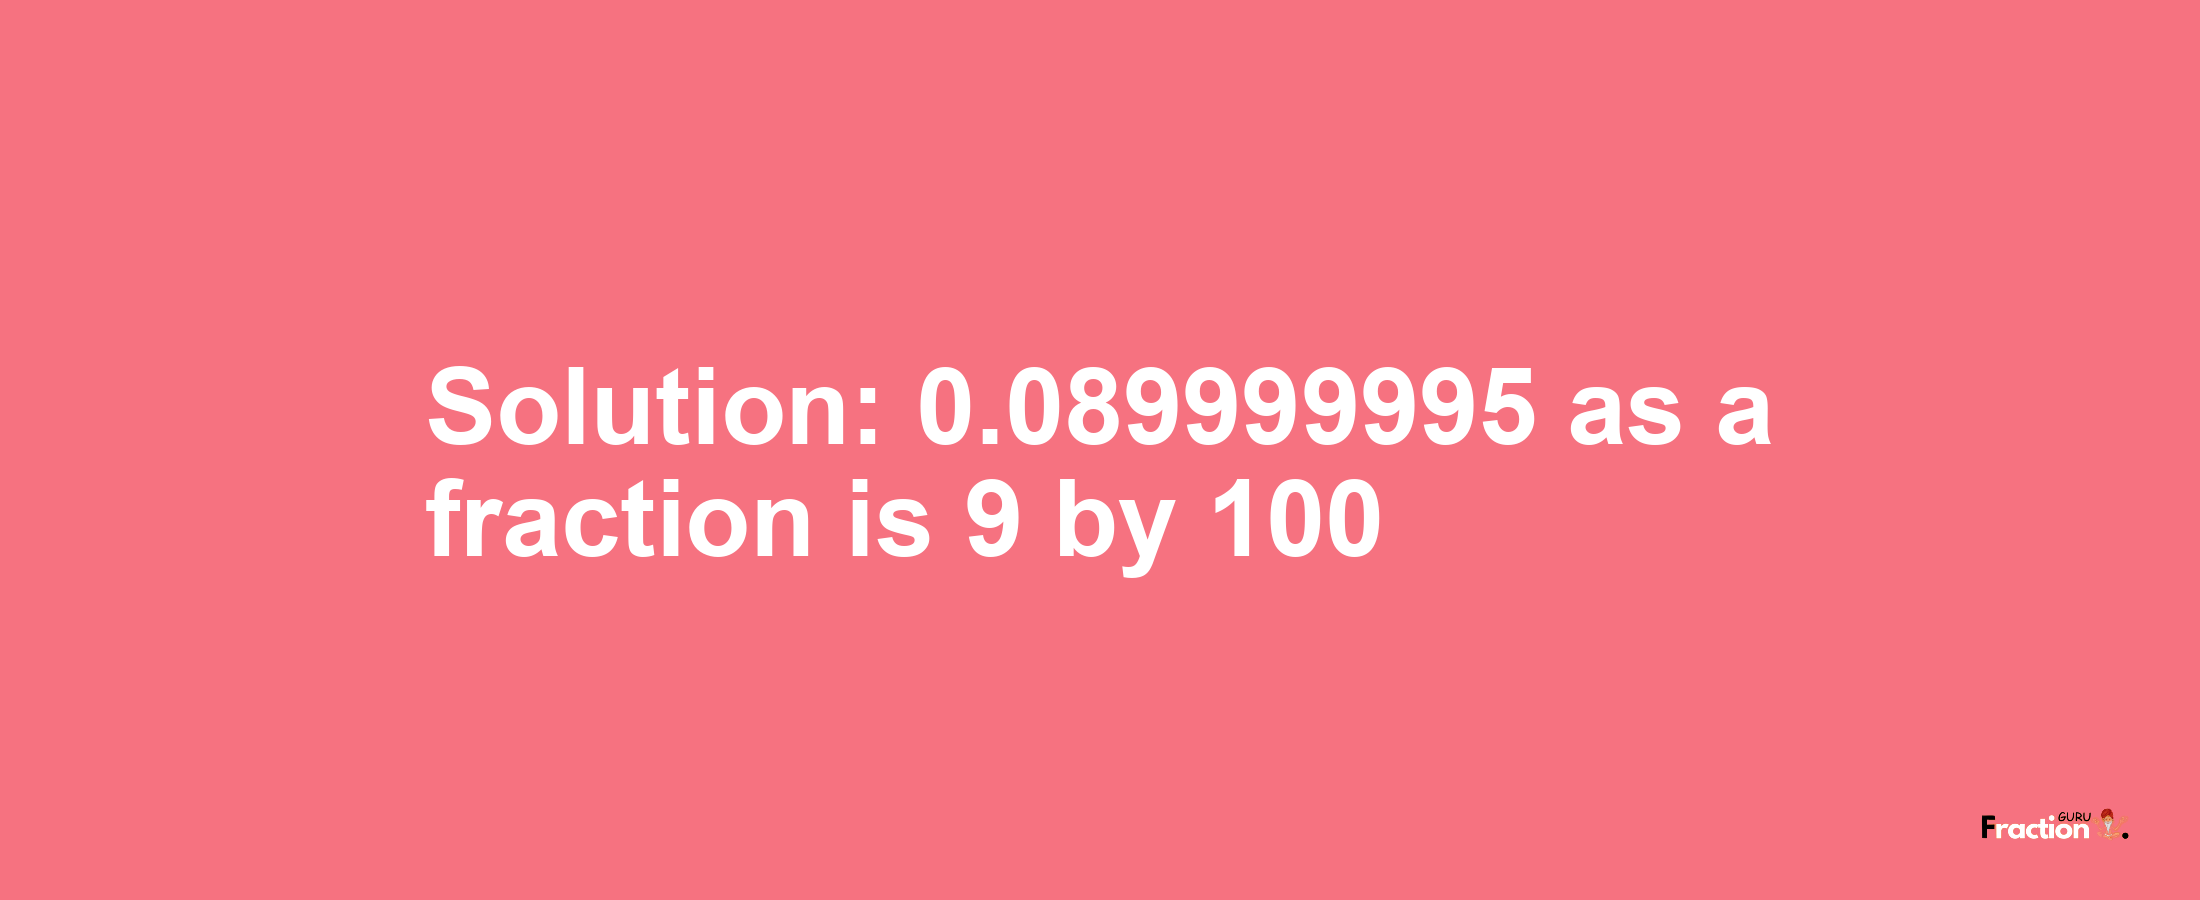 Solution:0.089999995 as a fraction is 9/100